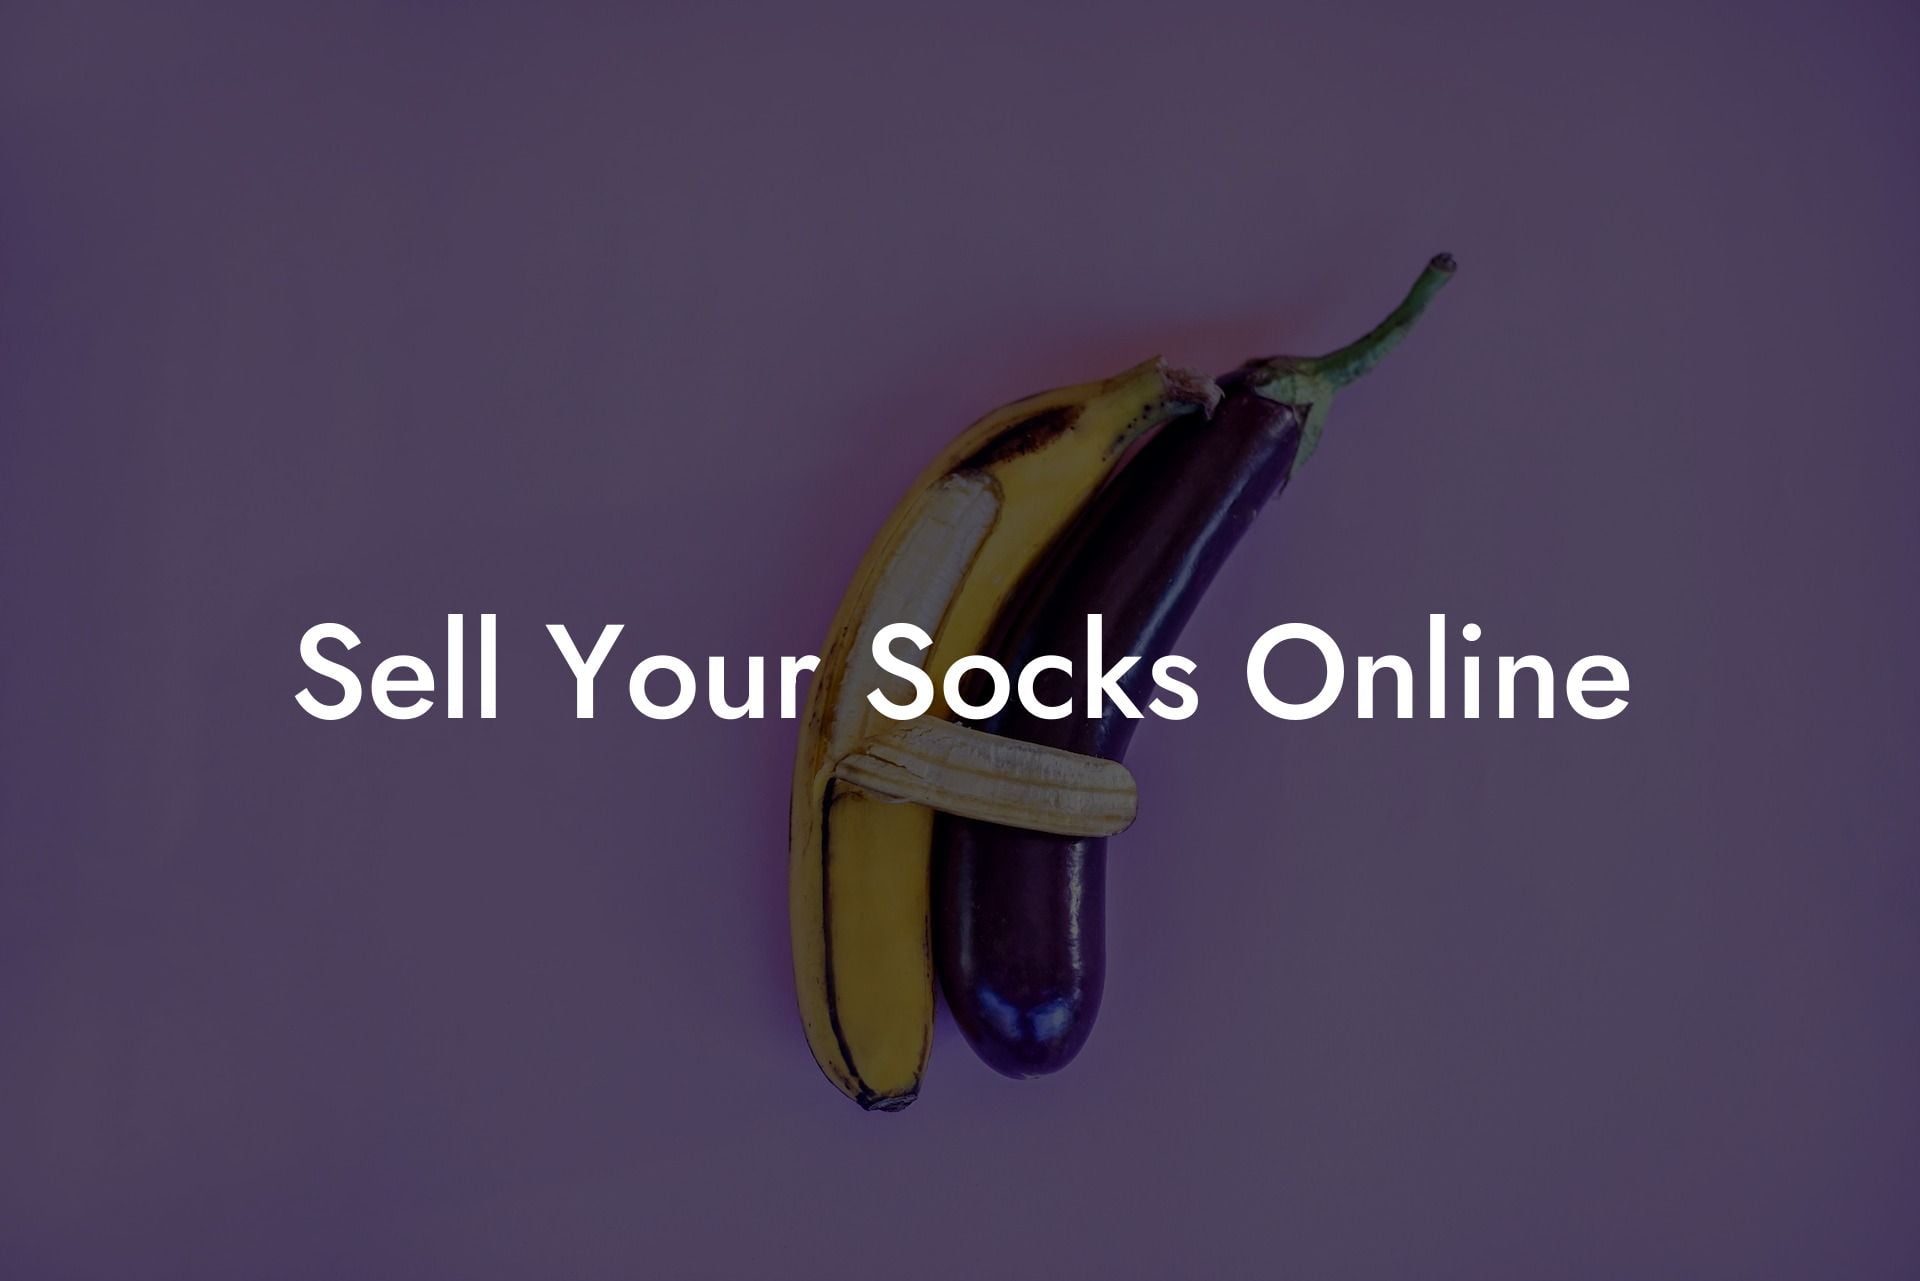 Sell Your Socks Online